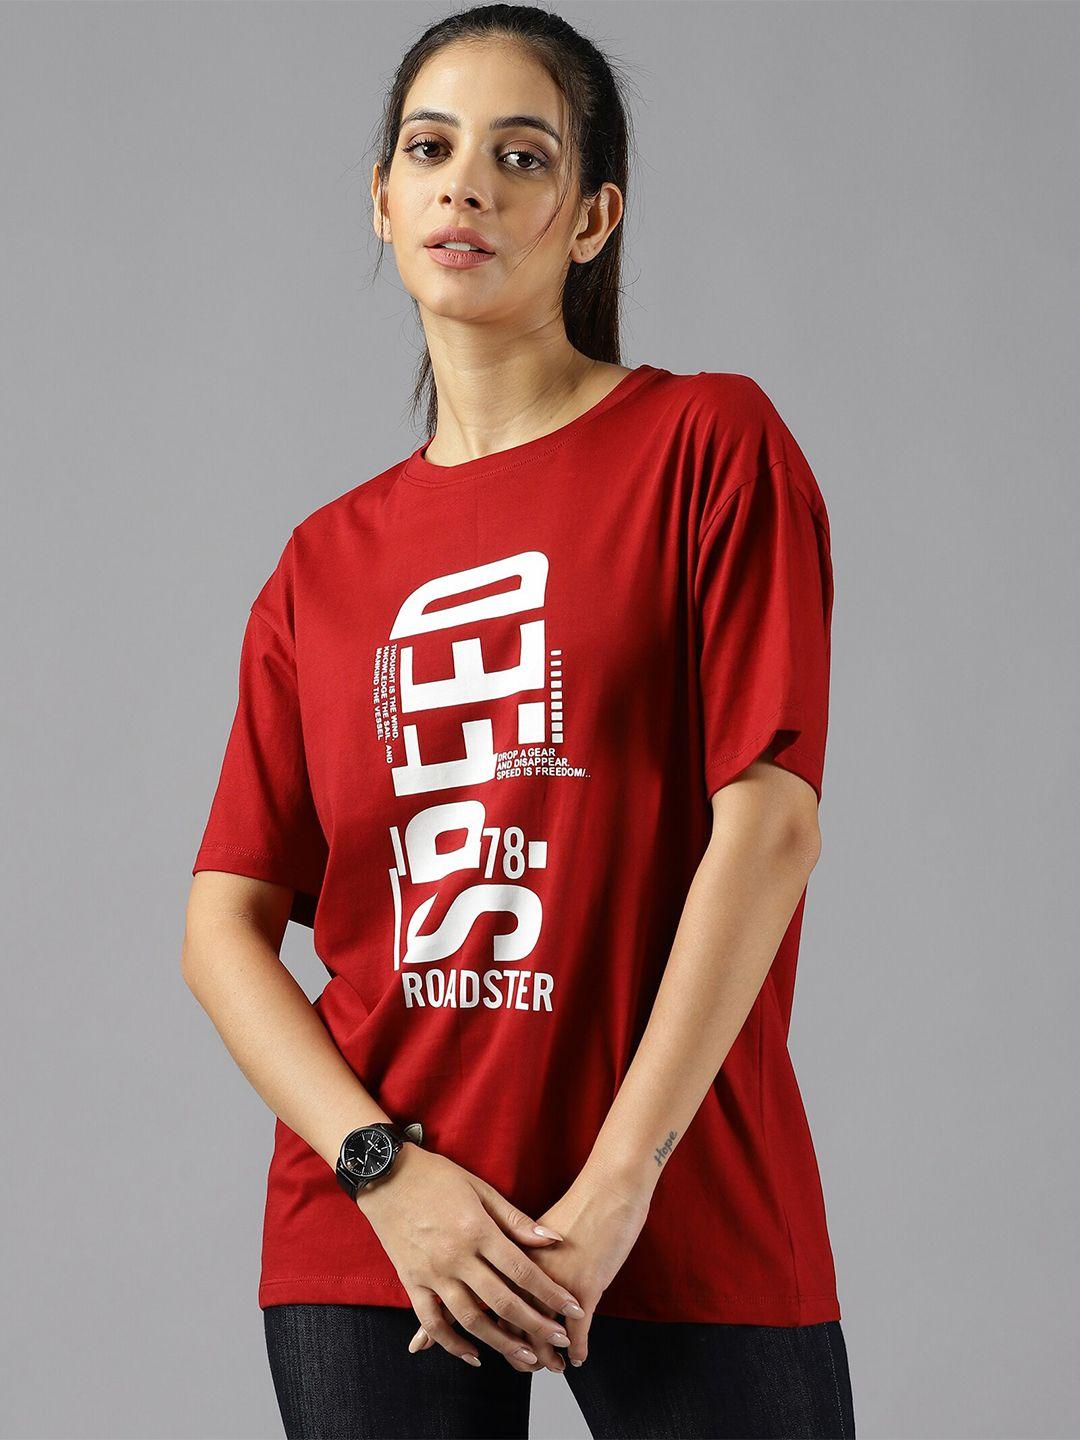 the roadster lifestyle co. red printed pure cotton oversized t-shirt